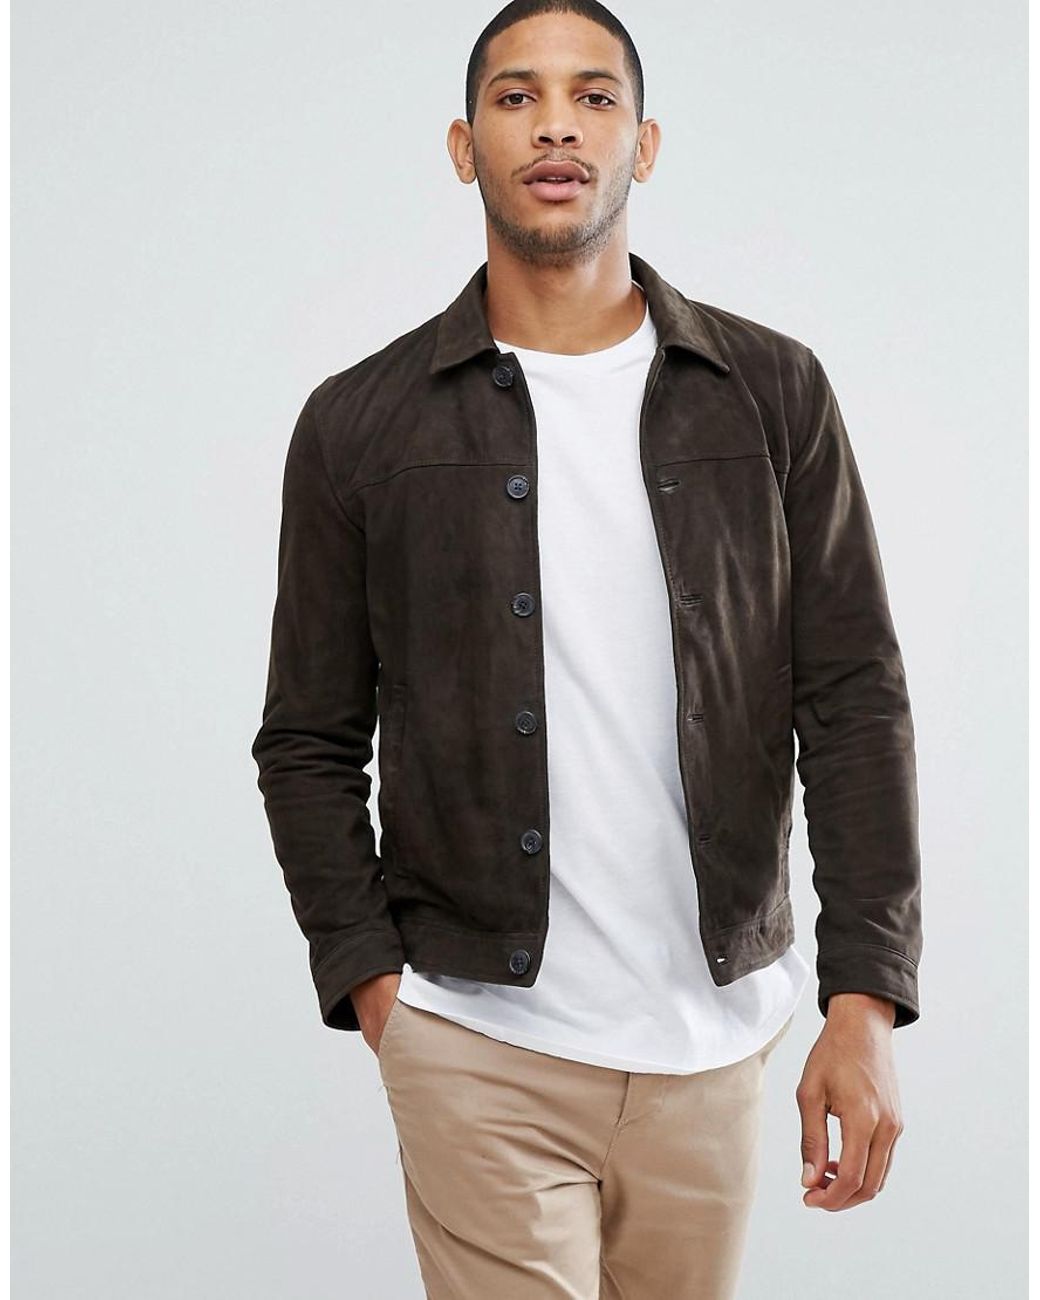 SELECTED Suede Overshirt Jacket in Green for Men | Lyst